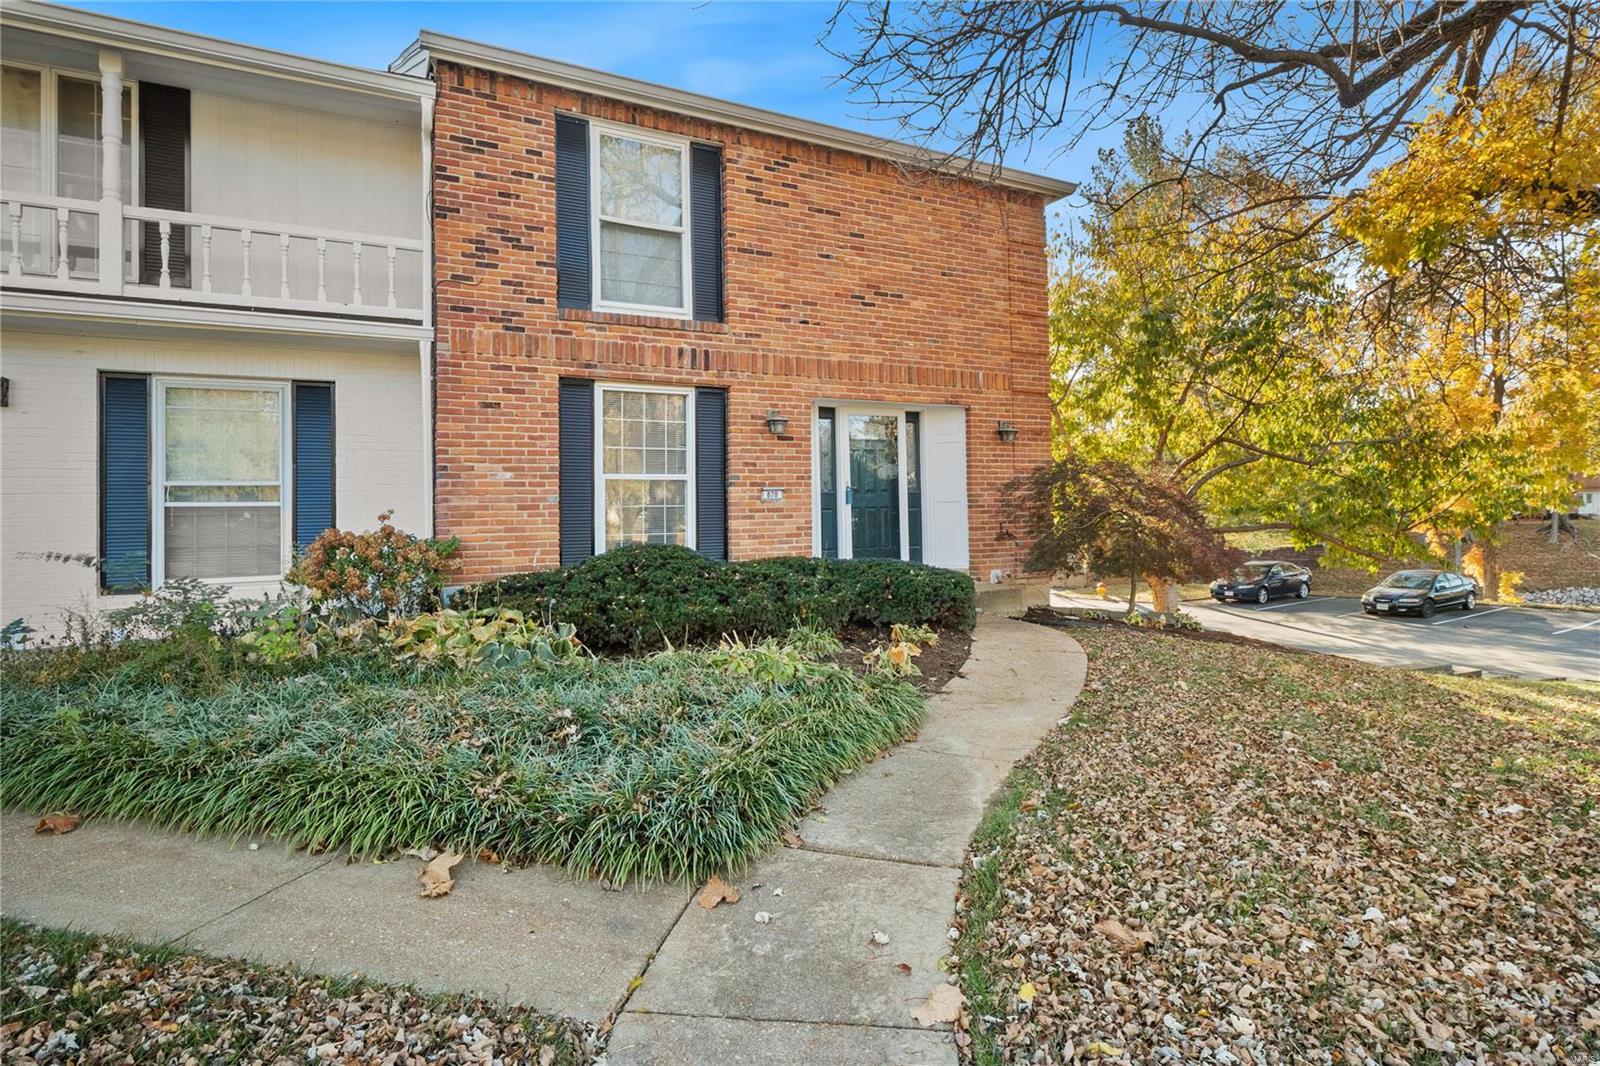 View St Louis, MO 63141 townhome